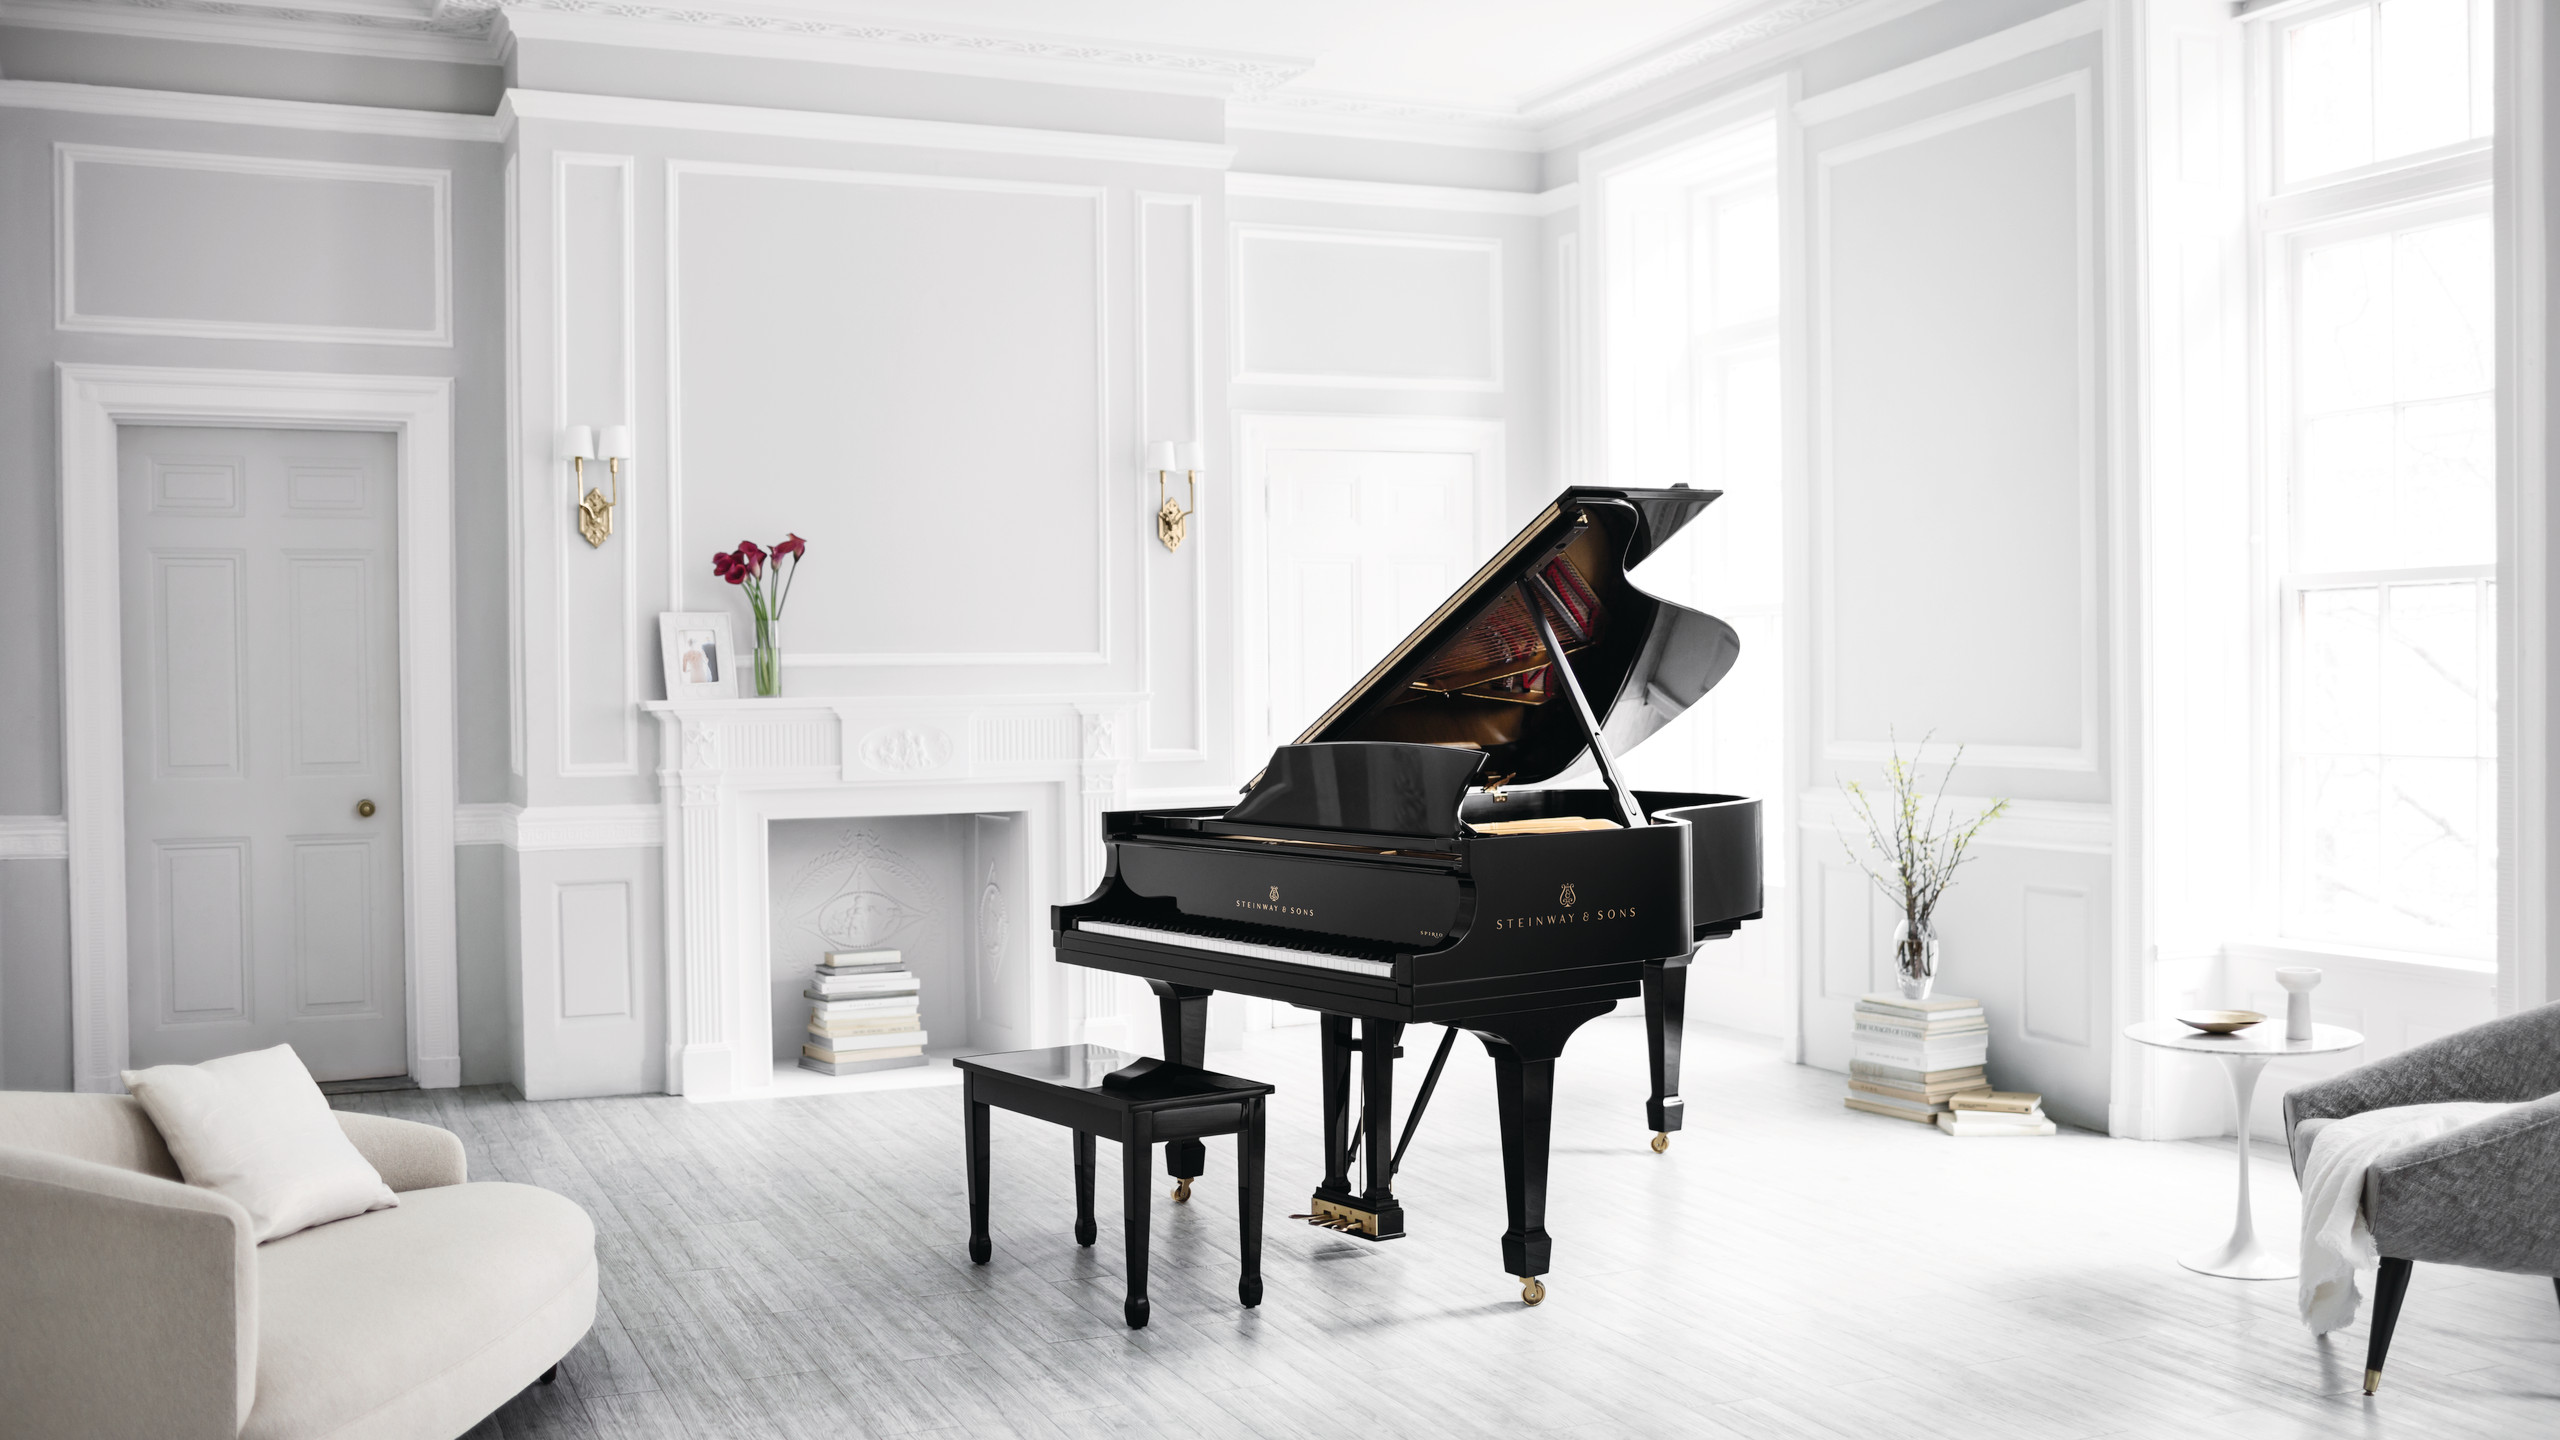 Piano in living room